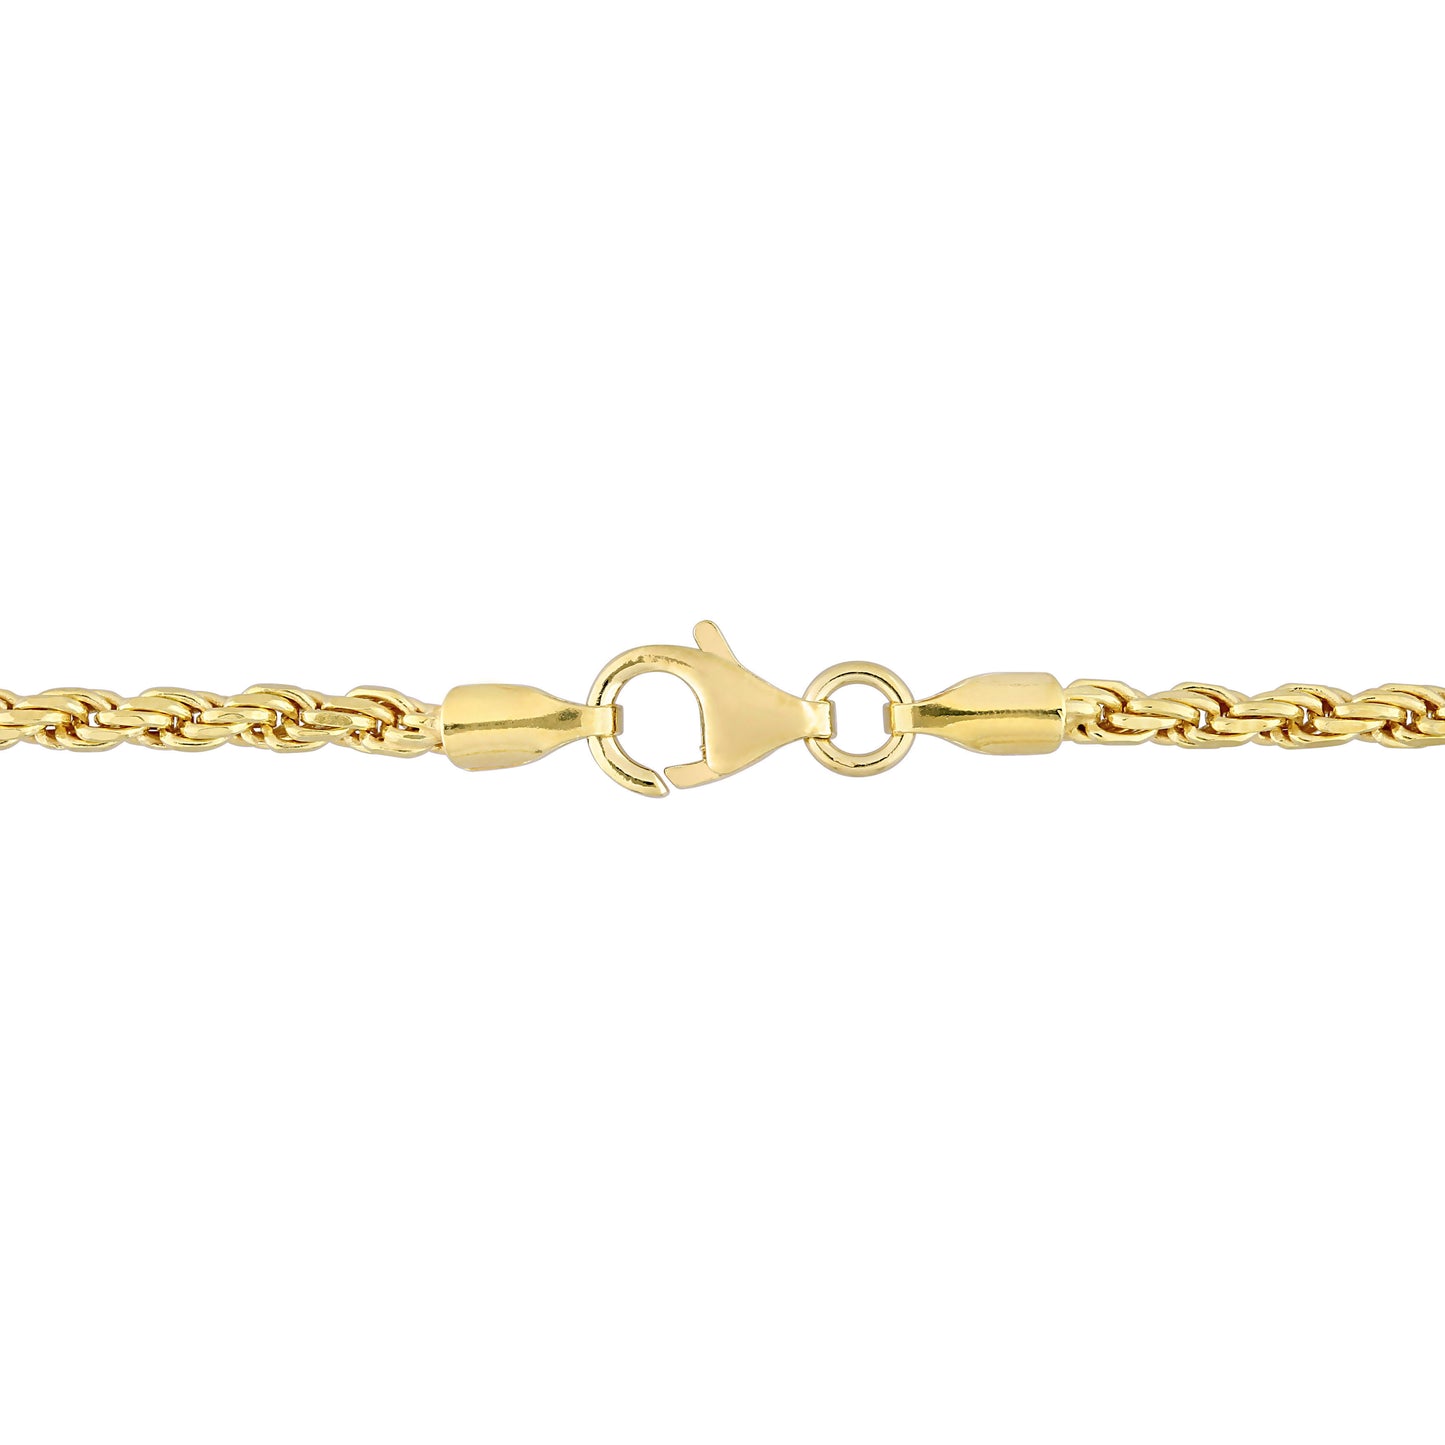 18k Yellow Gold Plated Rope Chain Bracelet in 2.2mm